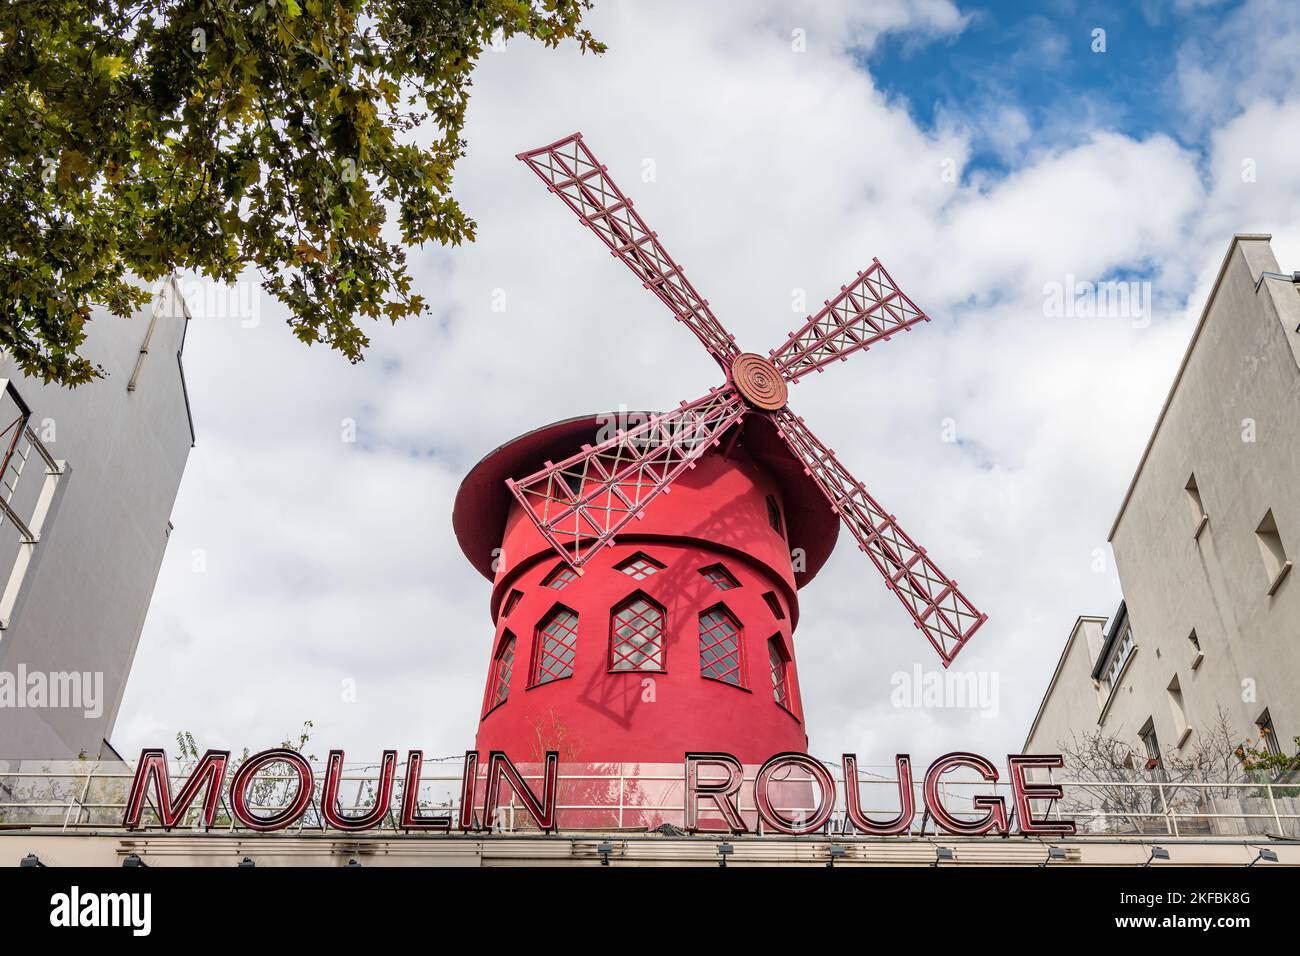 Moulin Rouge sign and Red Windmill, Paris, France Stock Photo